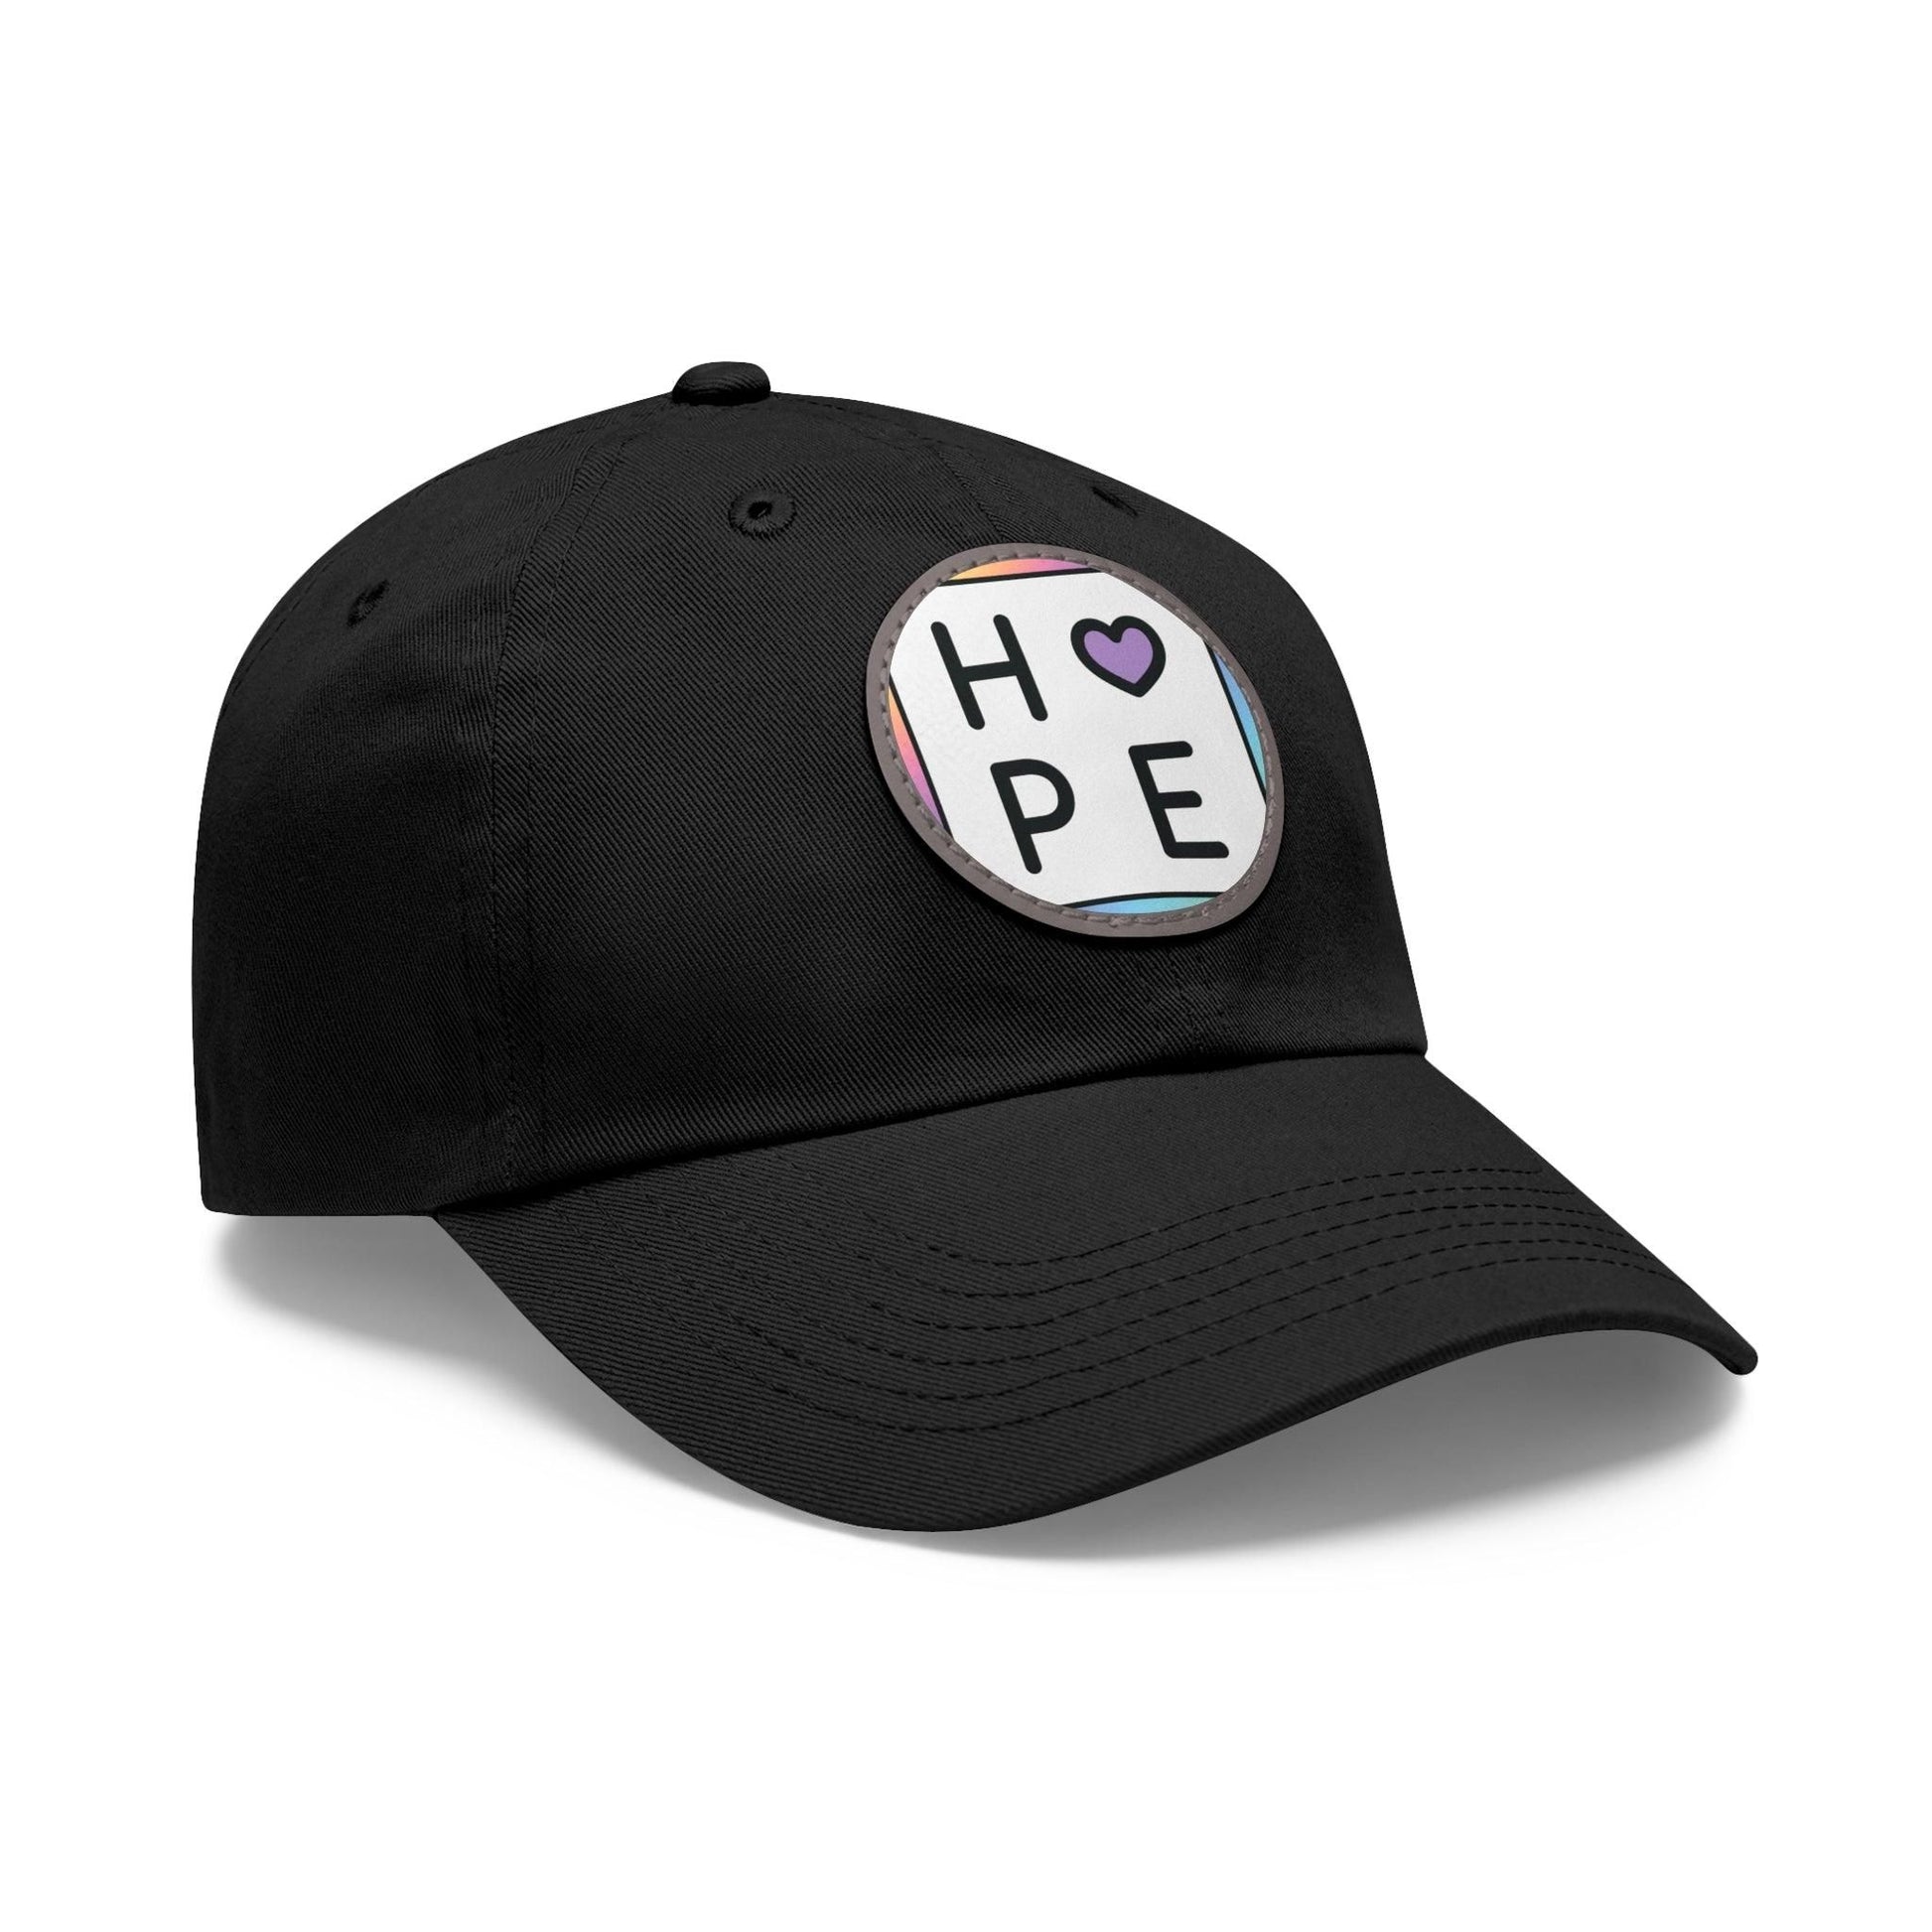 Hope Baseball Cap with Leather Patch Cap Black / Grey patch Circle One size